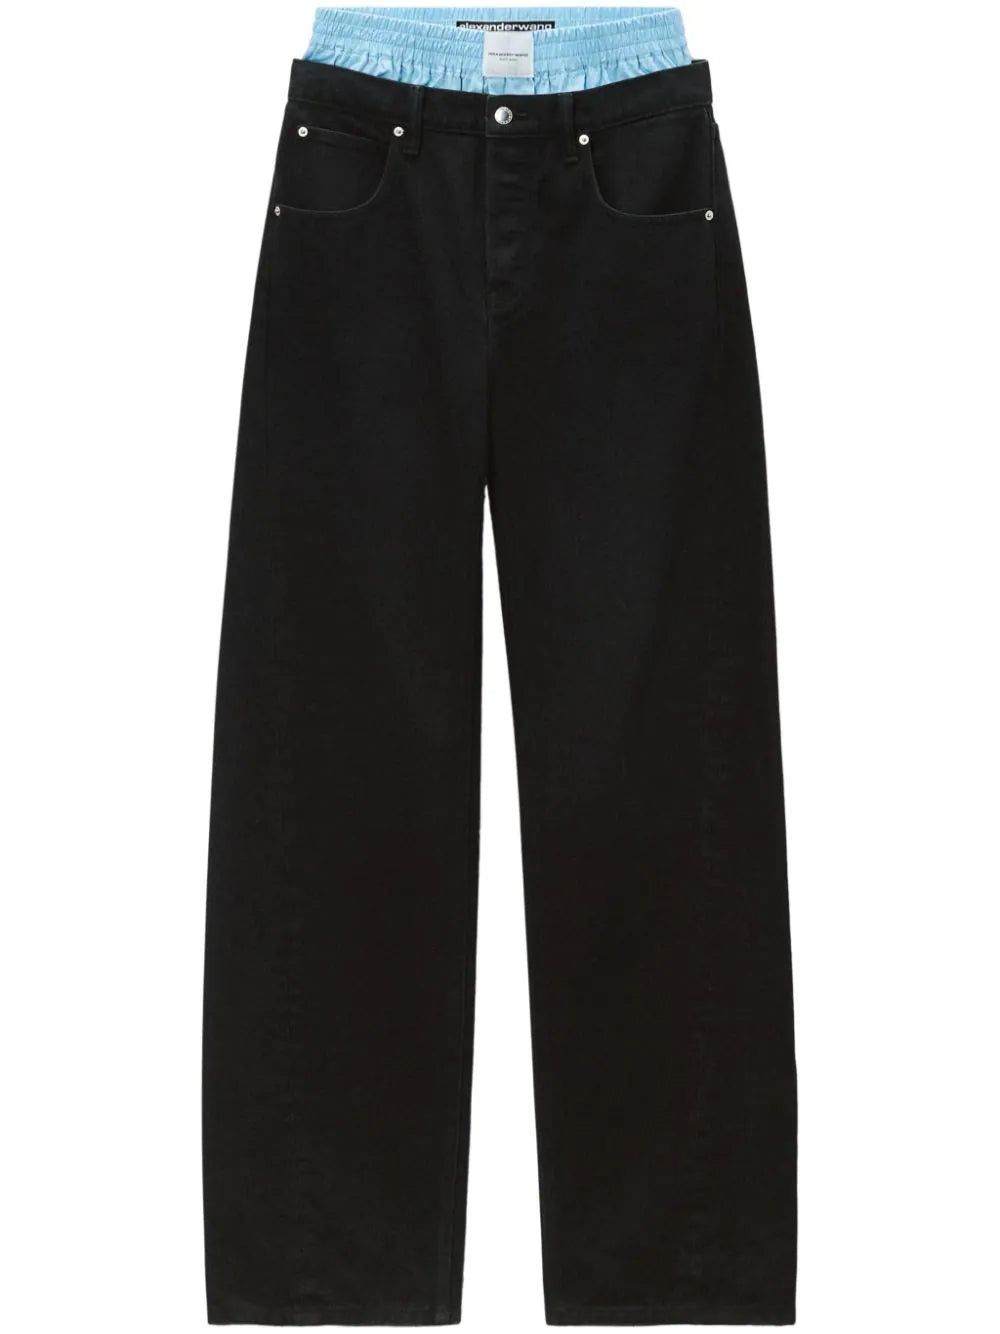 HIGH-WAIST BALLOON JEANS (WASHED BLACK) - 1